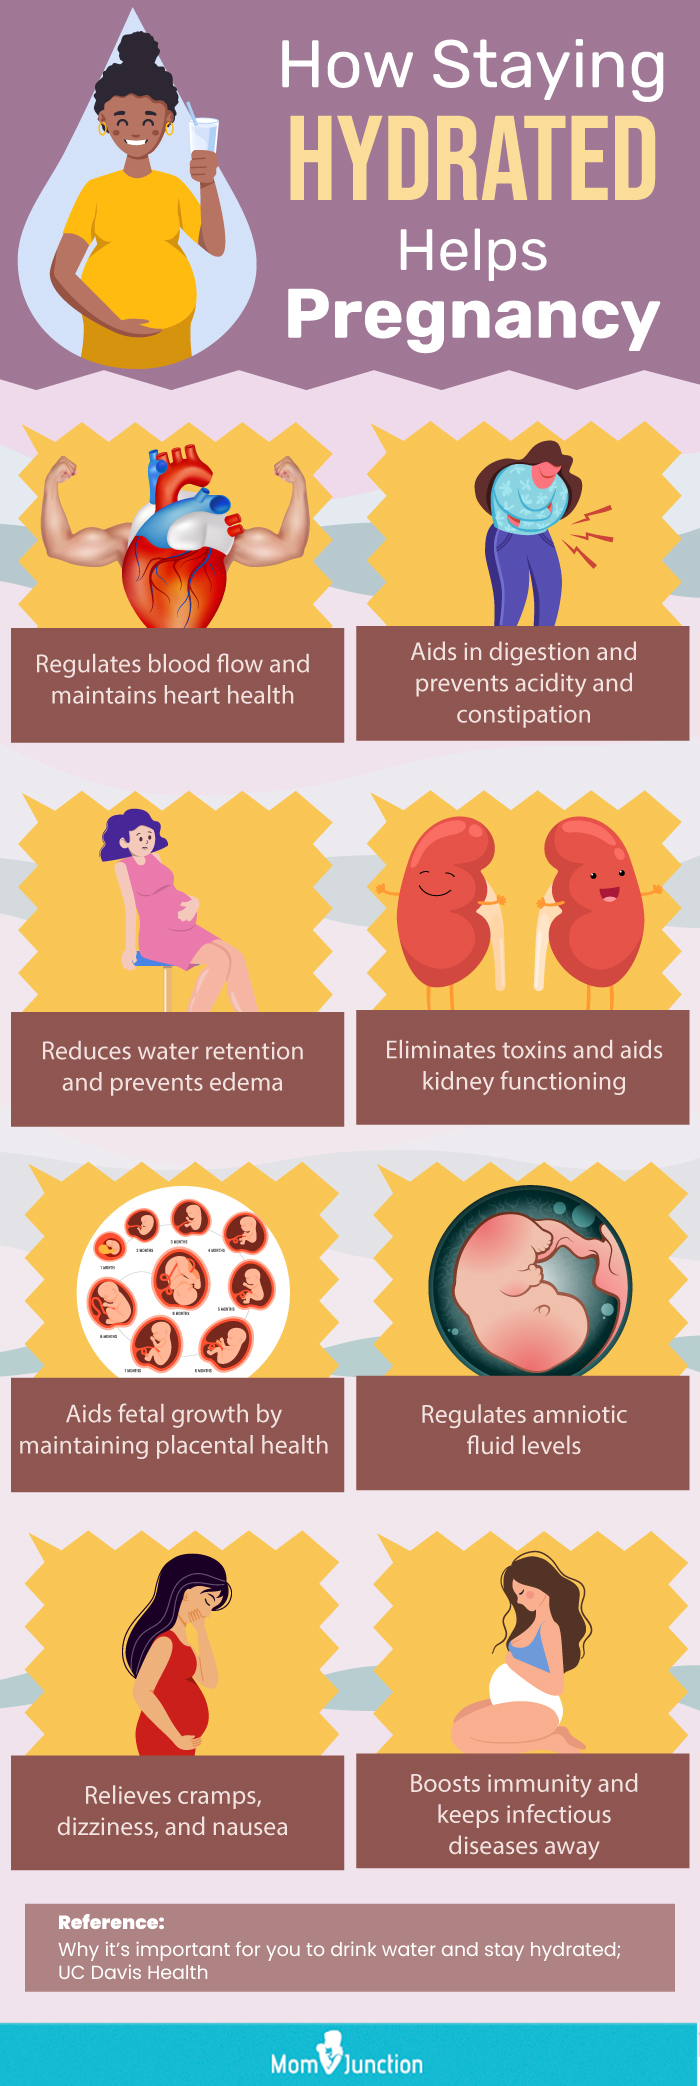 how staying hydrated helps pregnant women (infographic)